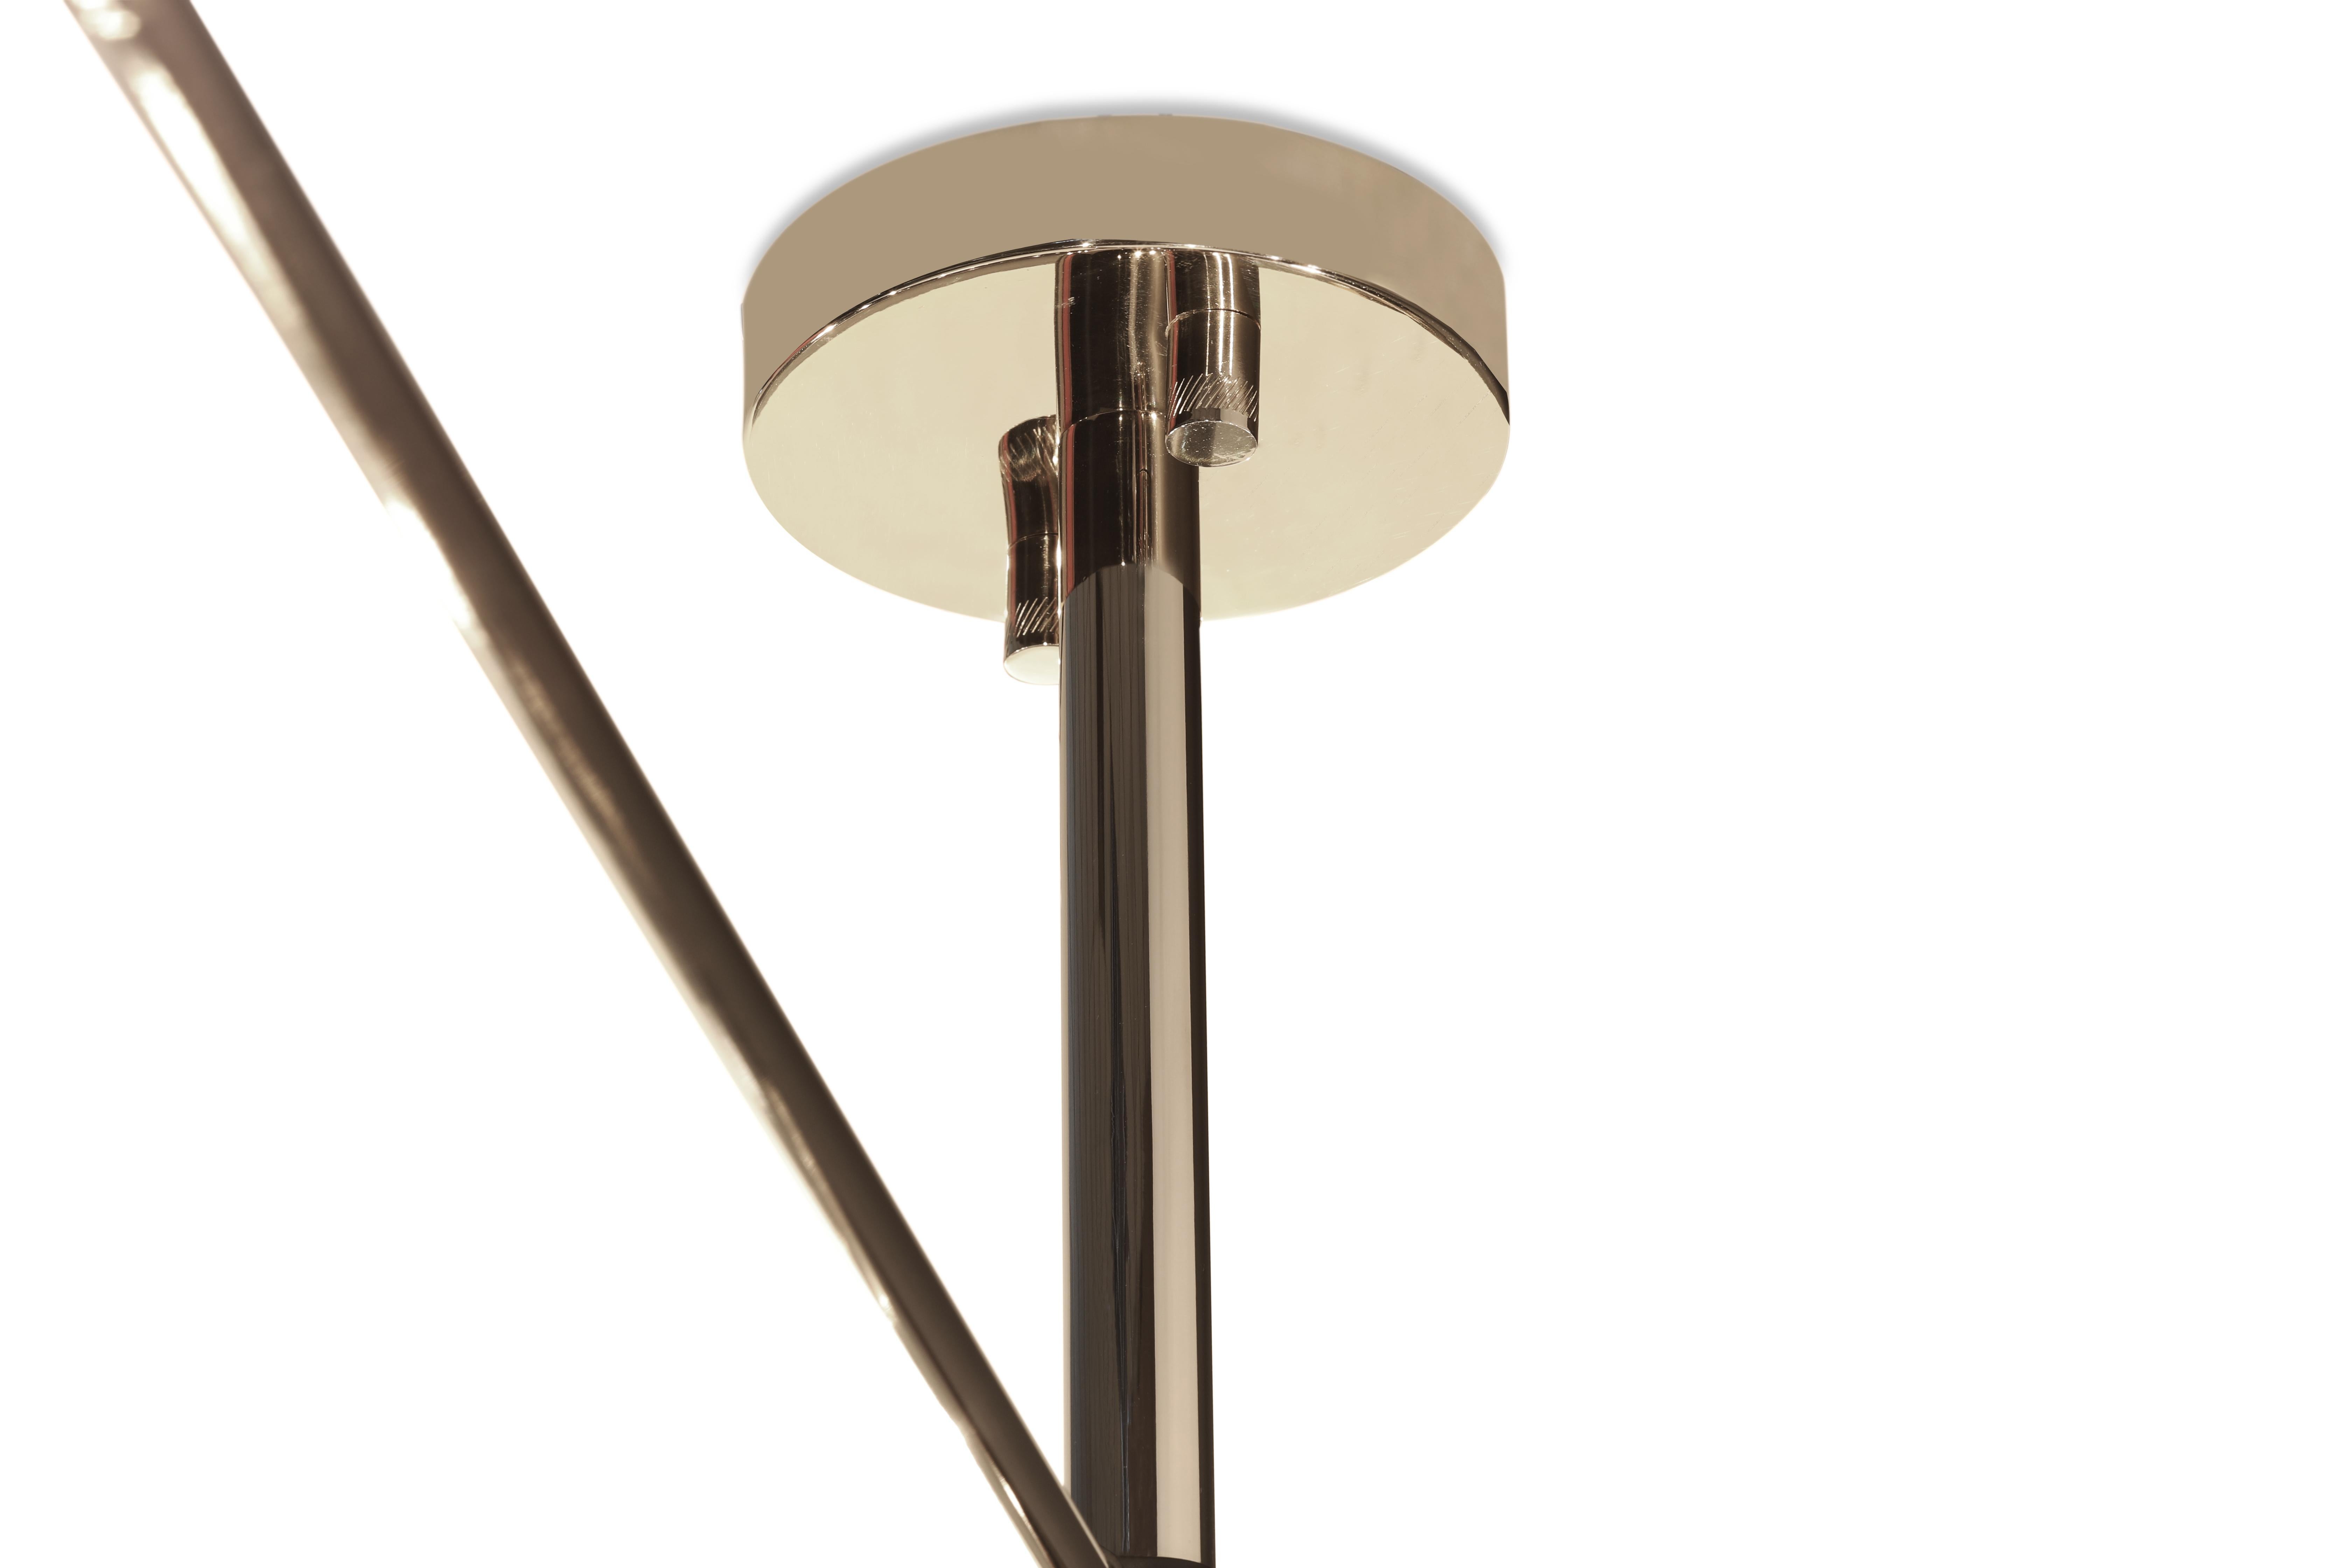 Inspired by the iconic mid-century era, Hank suspension light brings a graceful, organic shape to any room. Perfect for a mid-century modern interior, this lighting design offers the open look that is a great choice for today’s demand of stylish